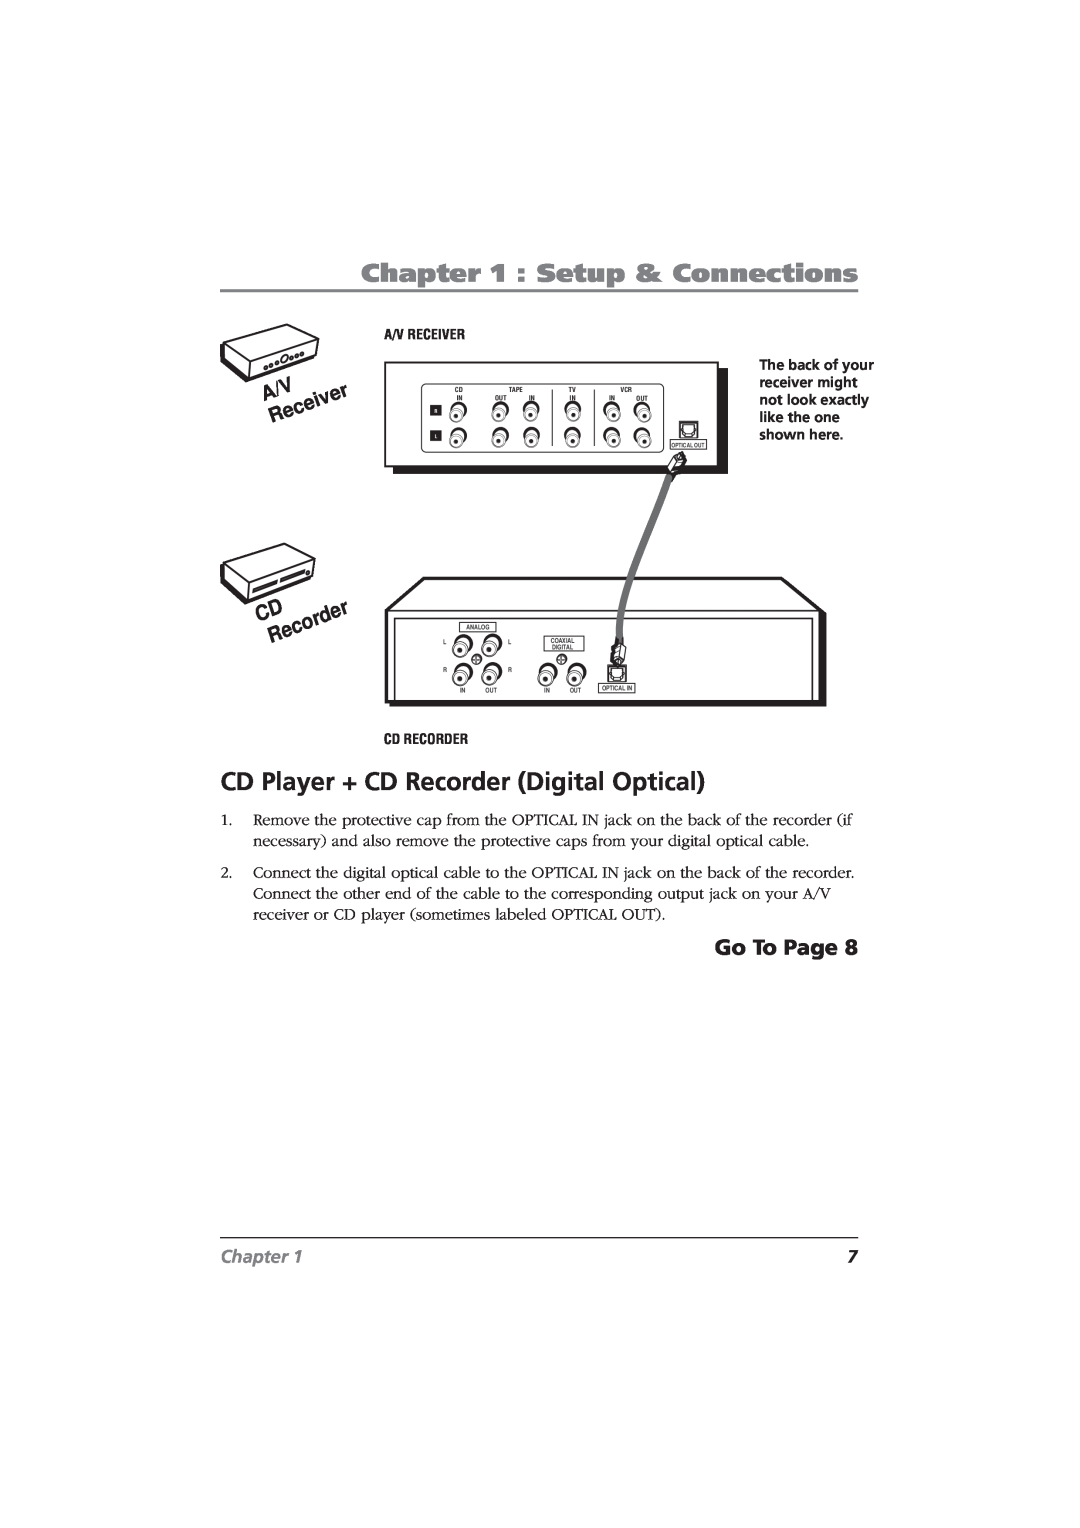 RCA CDRW120 manual CD Player + CD Recorder Digital Optical, Setup & Connections, iver, Rece, Chapter 